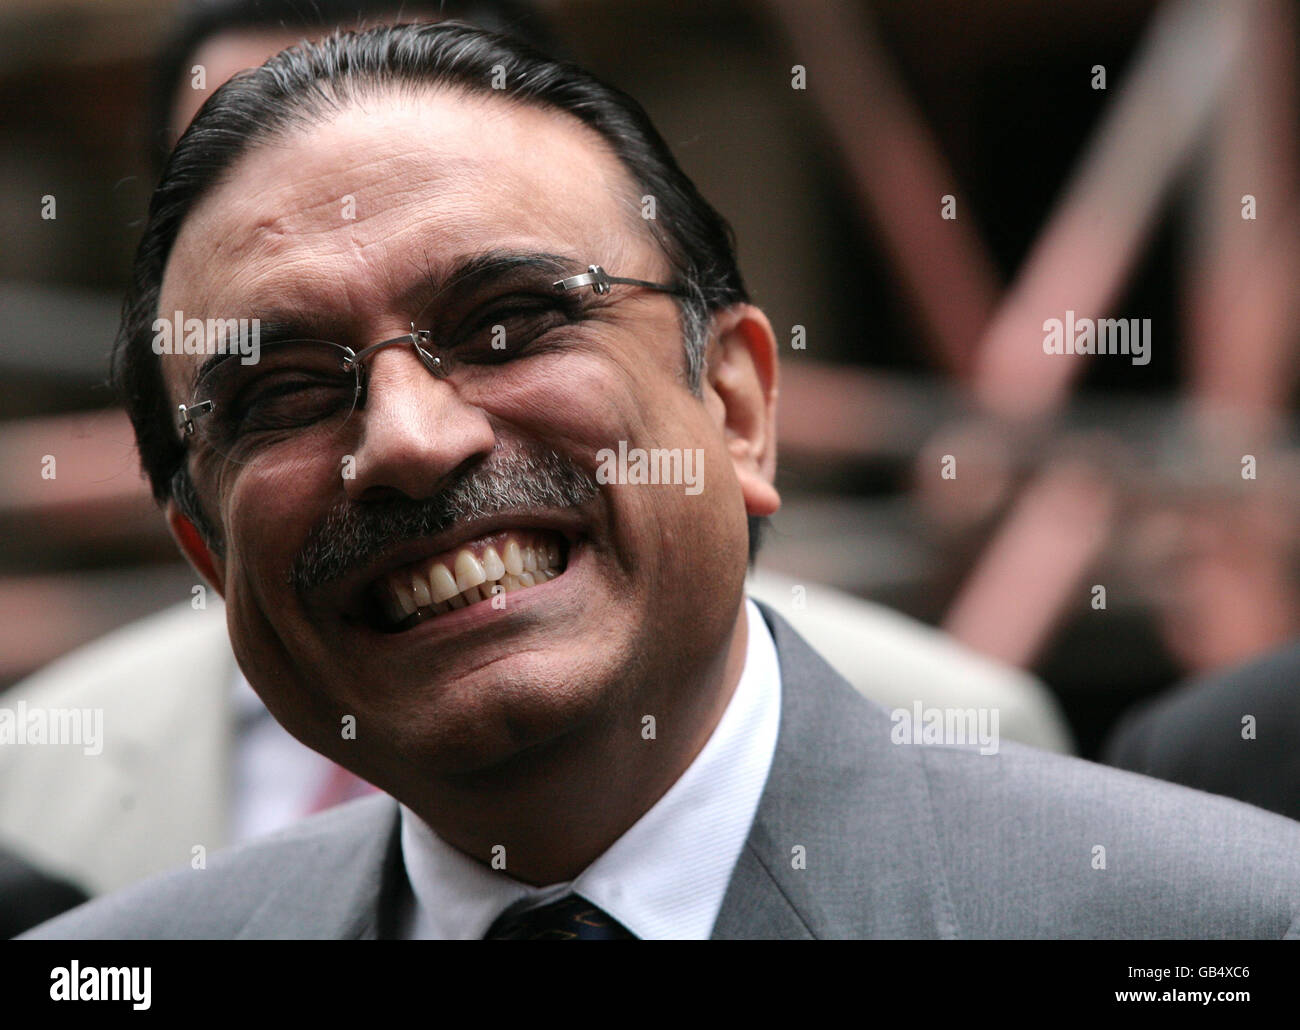 Pakistan President Asif Ali Zardari outside 10 Downing Street, London, after he had talks with Britain's Prime Minister Gordon Brown. Stock Photo